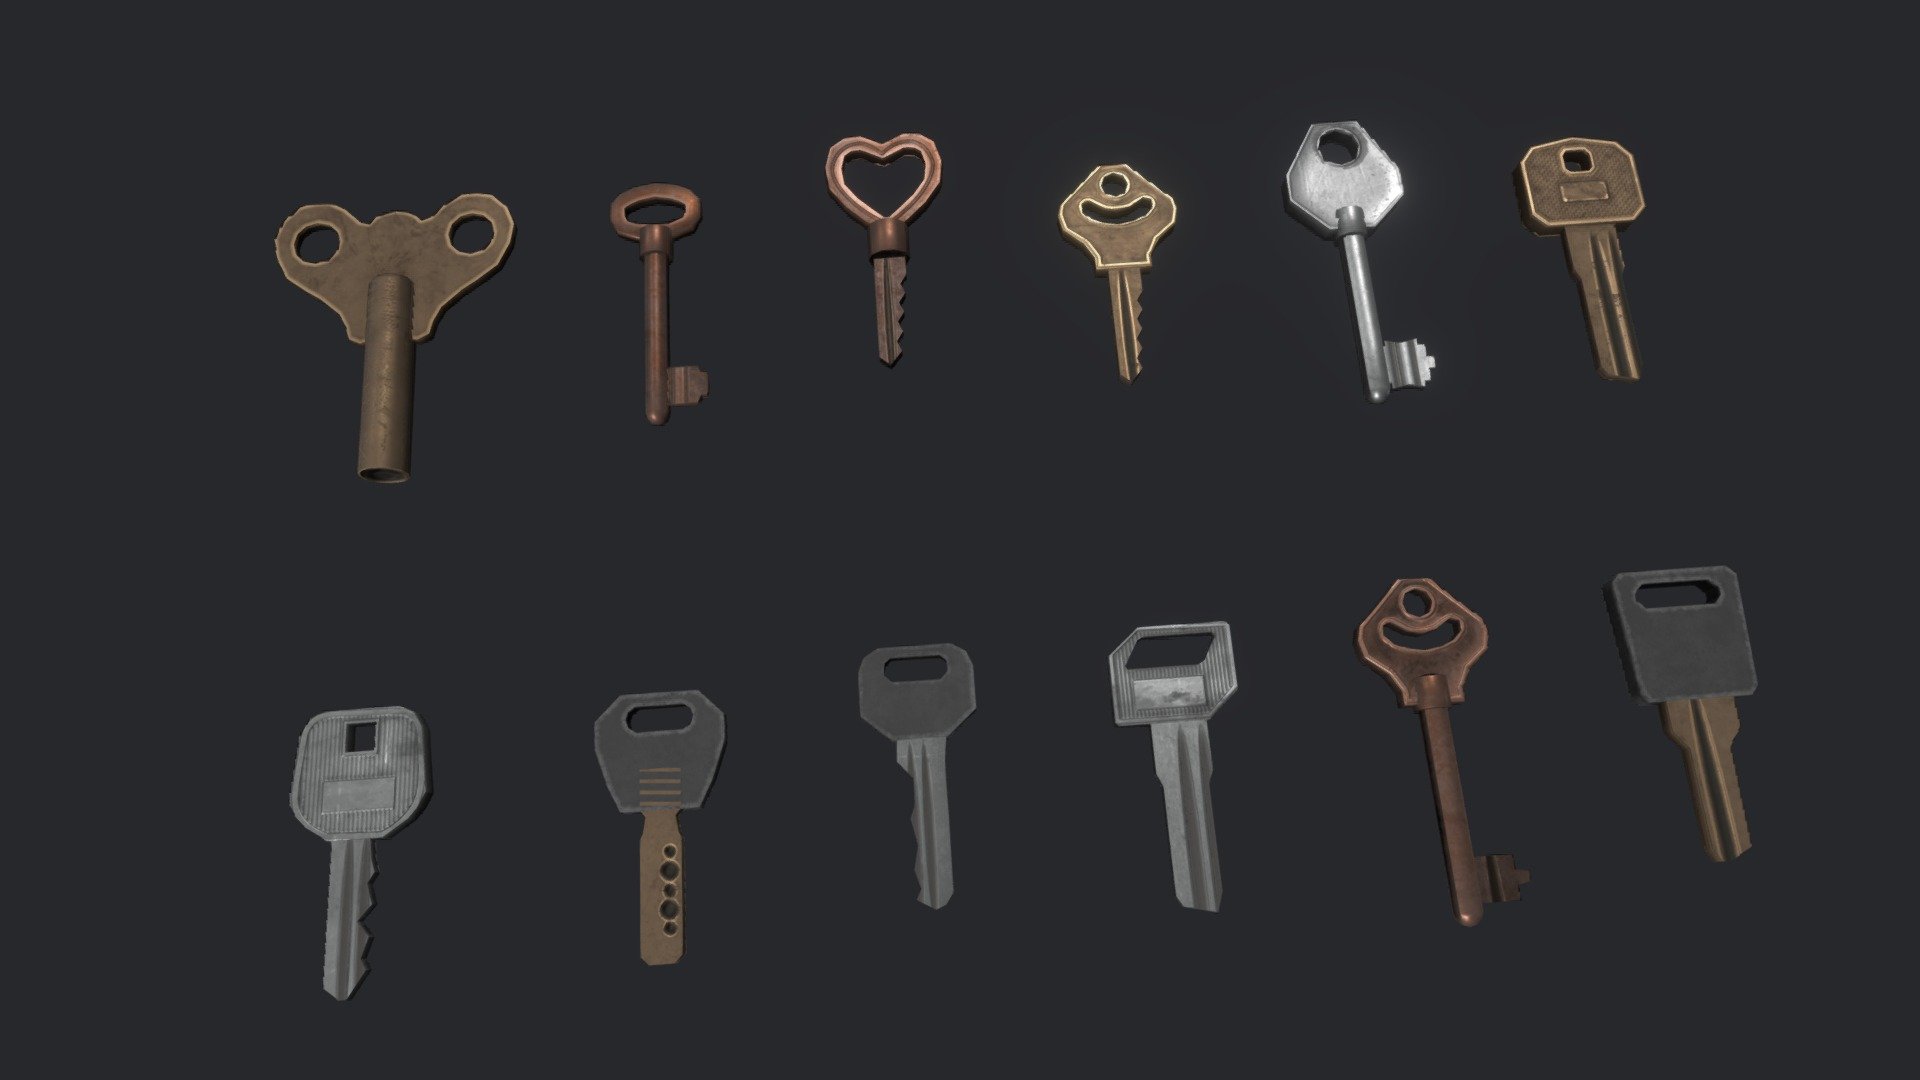 Modular key sets that allows for mixing and matching designs, as well as support for unique designs via trimsheet use!

I had found a bagful of old keys last month and got inspired to make some designs off them. Initially I had wanted to make them uniquely unwrapped, but I realized that it actually has great potential in a modular format. Set includes more than a dozen key head (???) variants as well as more than half a dozen blade variants. 

Modelled in Blender, textures created in Substance Painter, with some help from photoshop for cavity details.

On purchase includes exported FBX modules as well as textures for the 3 material variants (only SpecGloss PBR supported fully, but MetRough textures also included as I have already made them), along with a .blend file that contains the modular mesh set 3d model